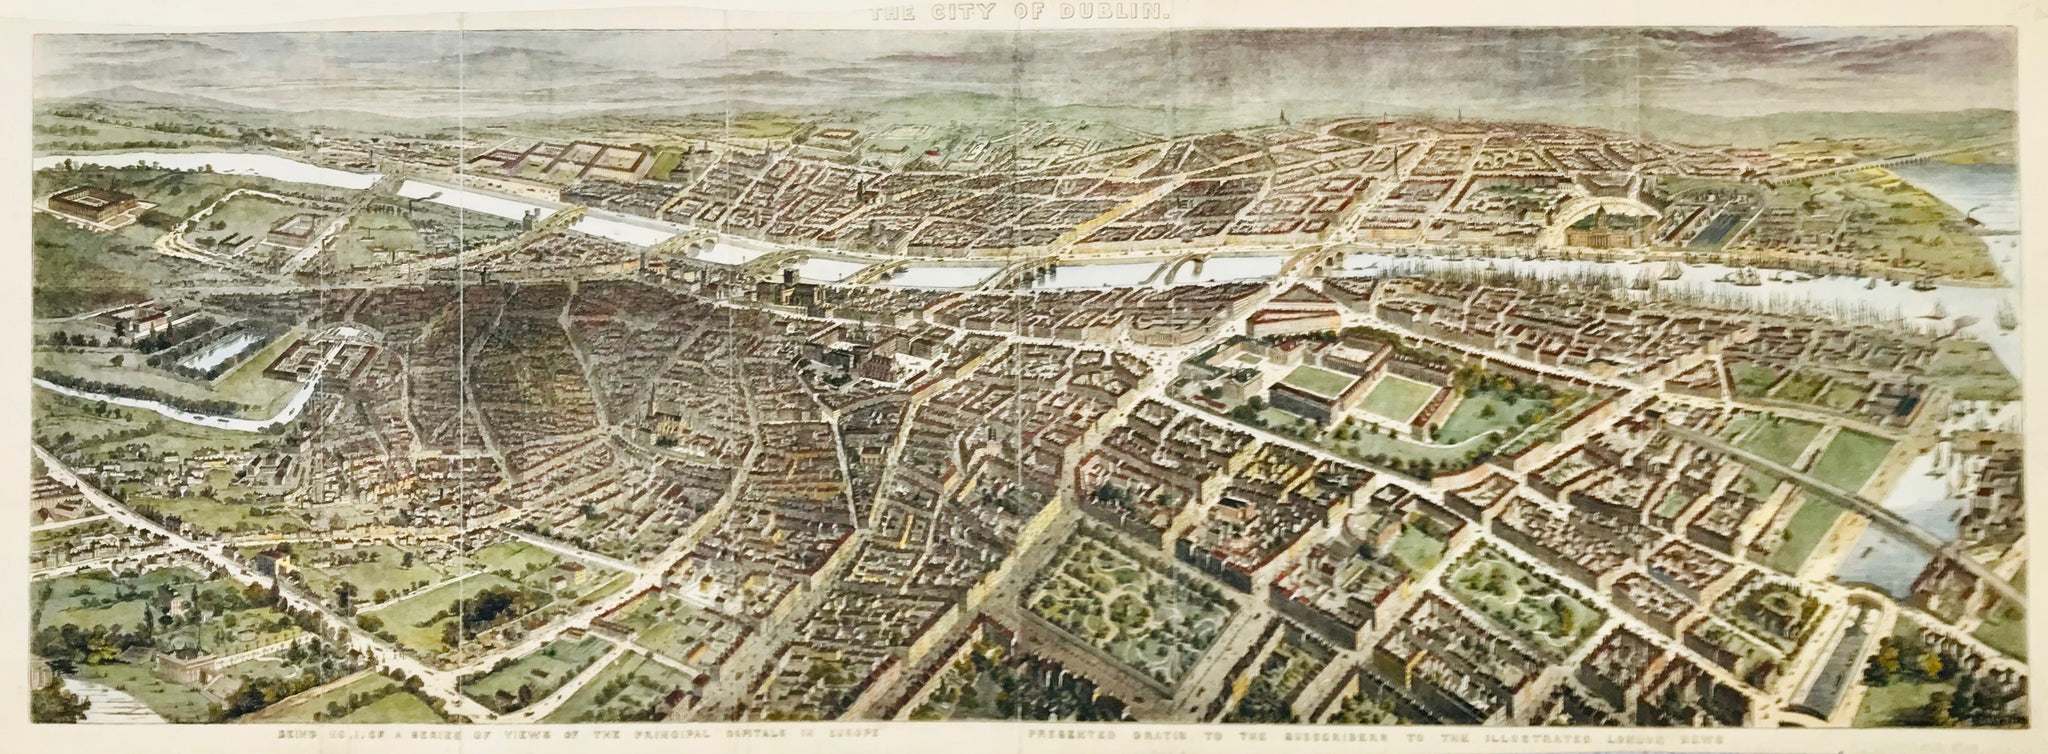 "The City of Dublin"  Very attractively hand-colored impressive panoramic view of Dublin, from the position of a half bird's eye view.  Stated below by the publisher: "Being No. 1 of a series of views of the Principal Capitals in Europe Presented gratis to the Subscribers to The Illustrated London News" (TILN)  Large, smashing folio areal view of Ireland's Capital Dublin.